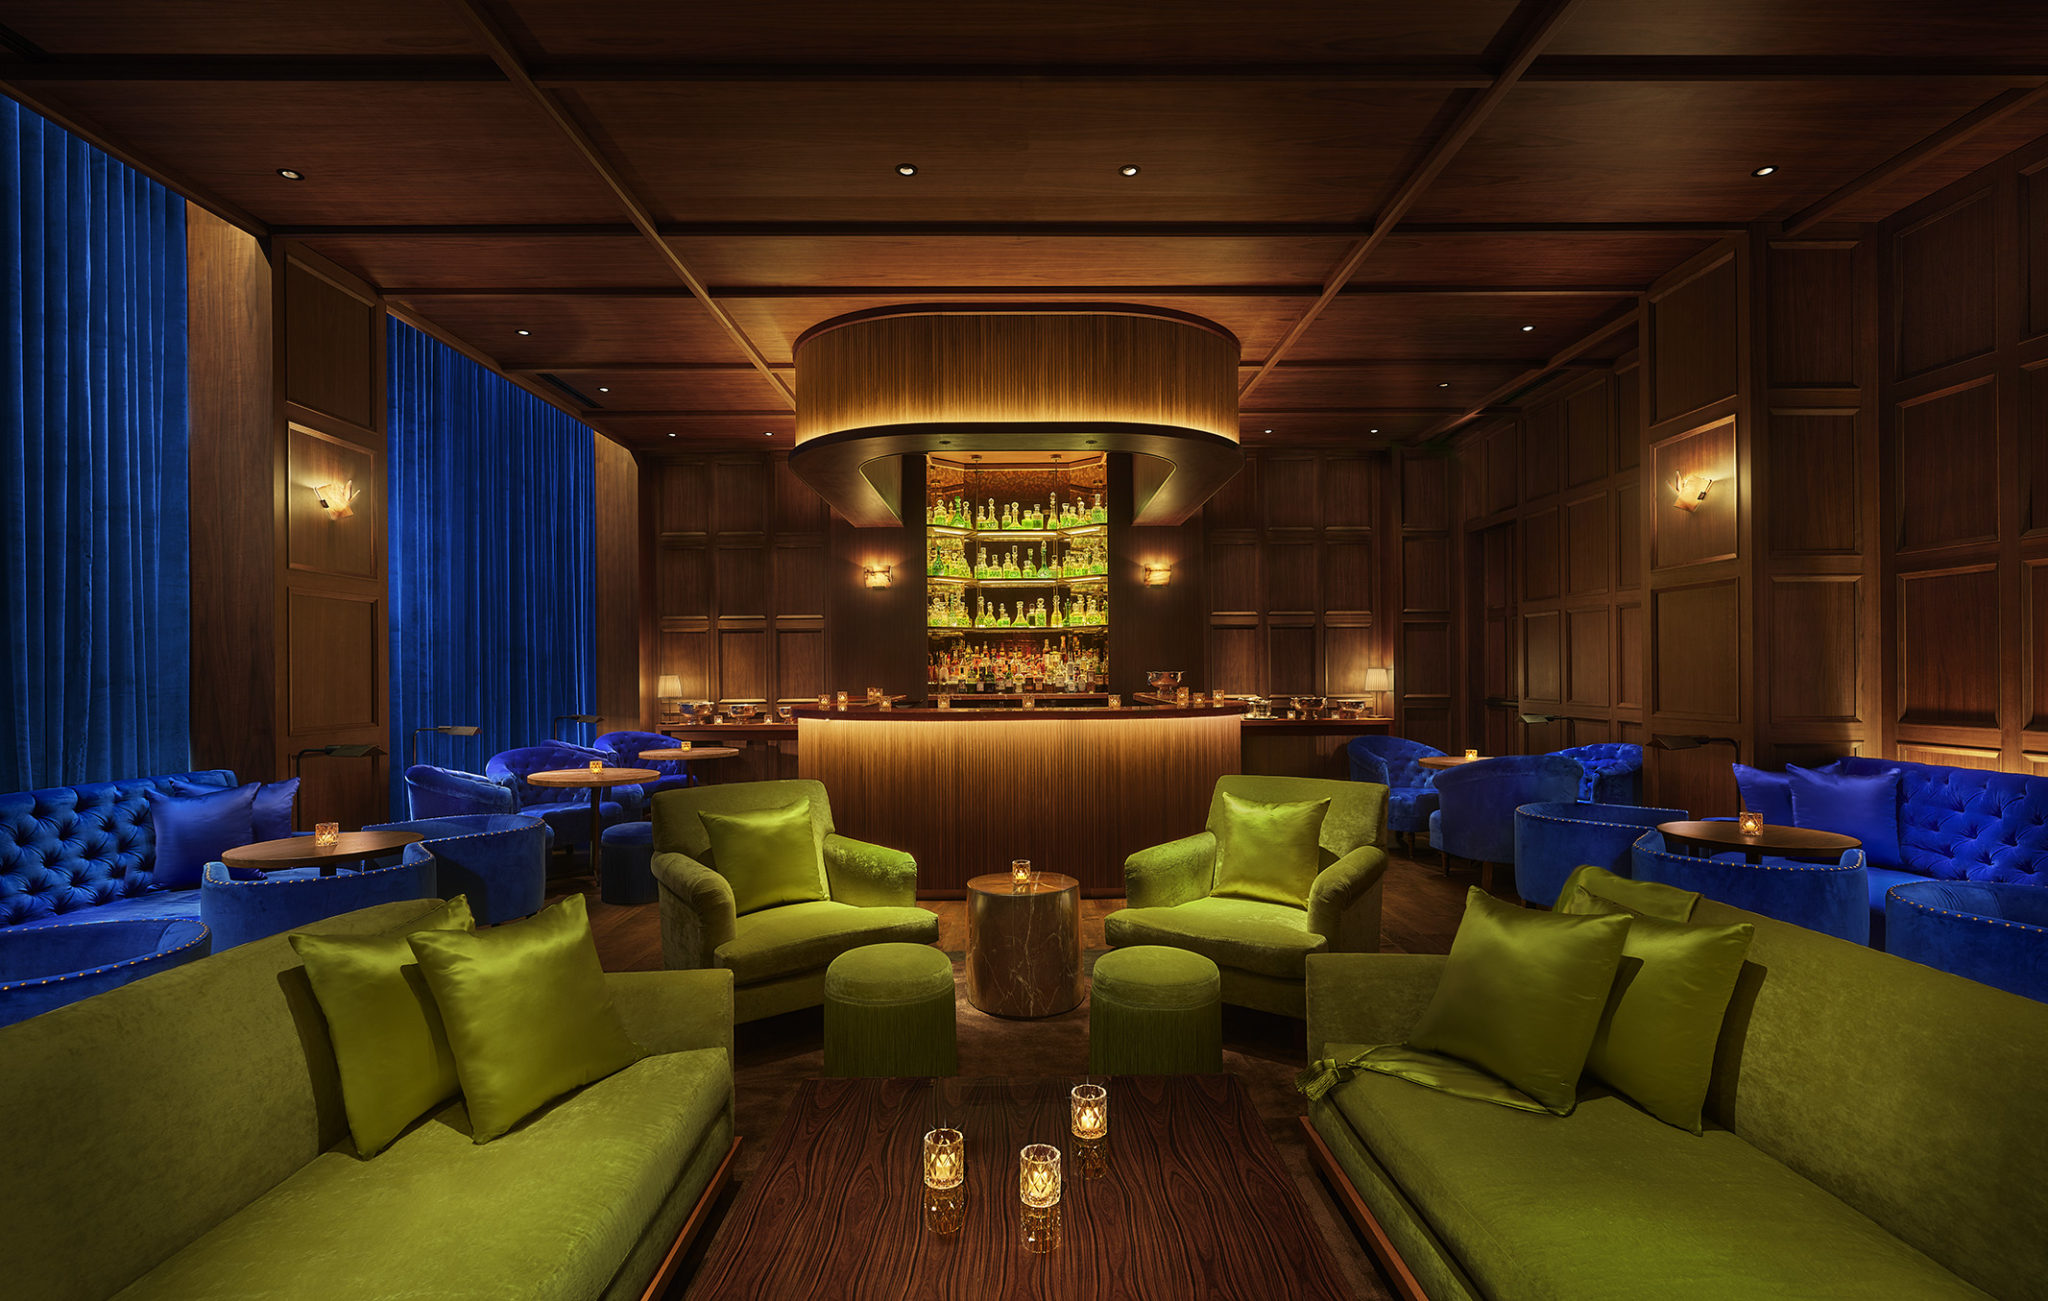 Dimly lit bar & lounge with bright blue and green velvet seating